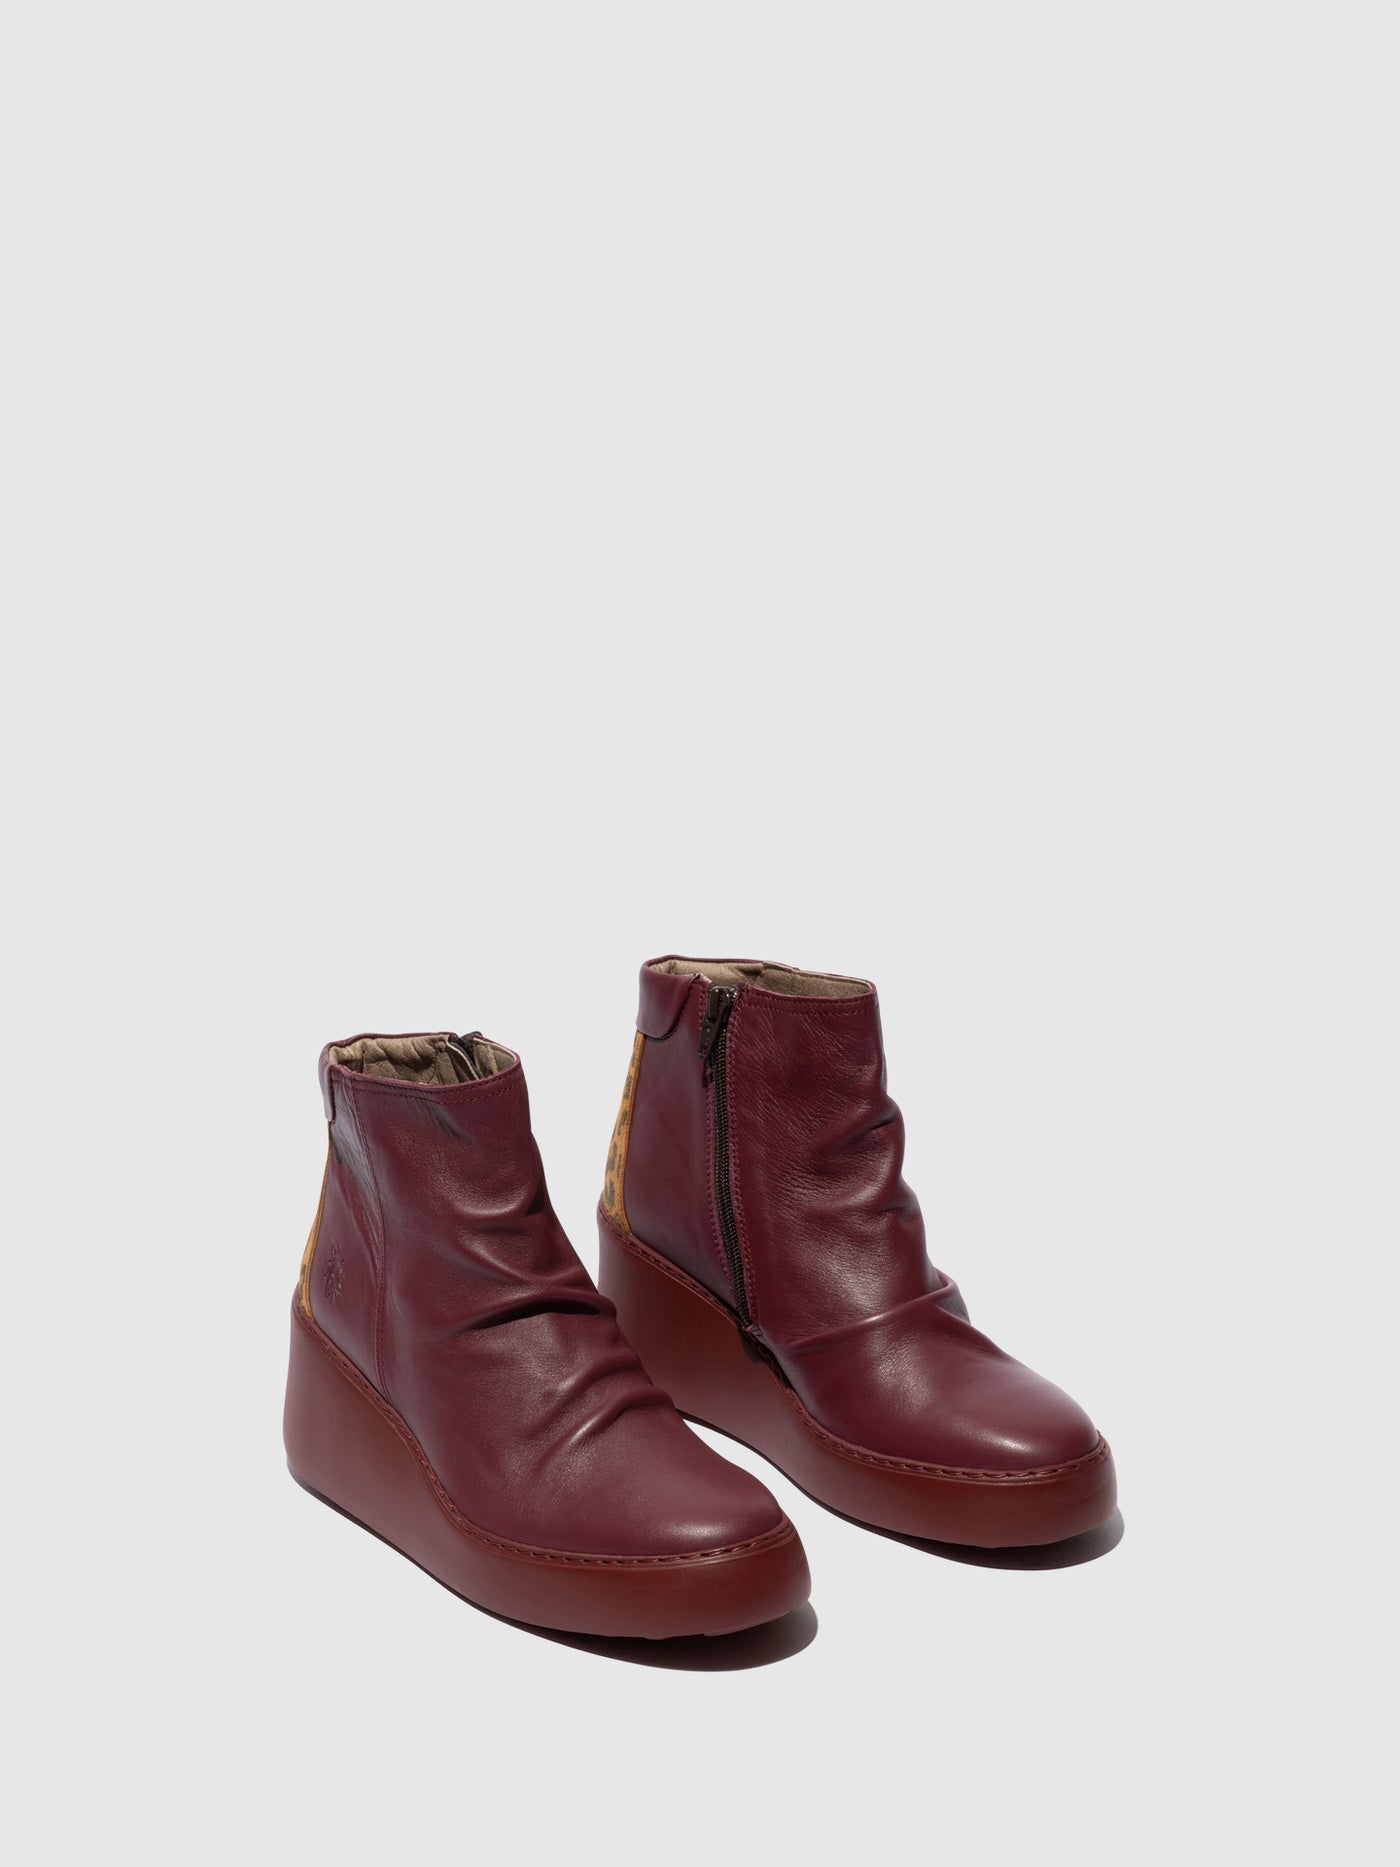 Zip Up Ankle Boots DABE461FLY WINE/TAN